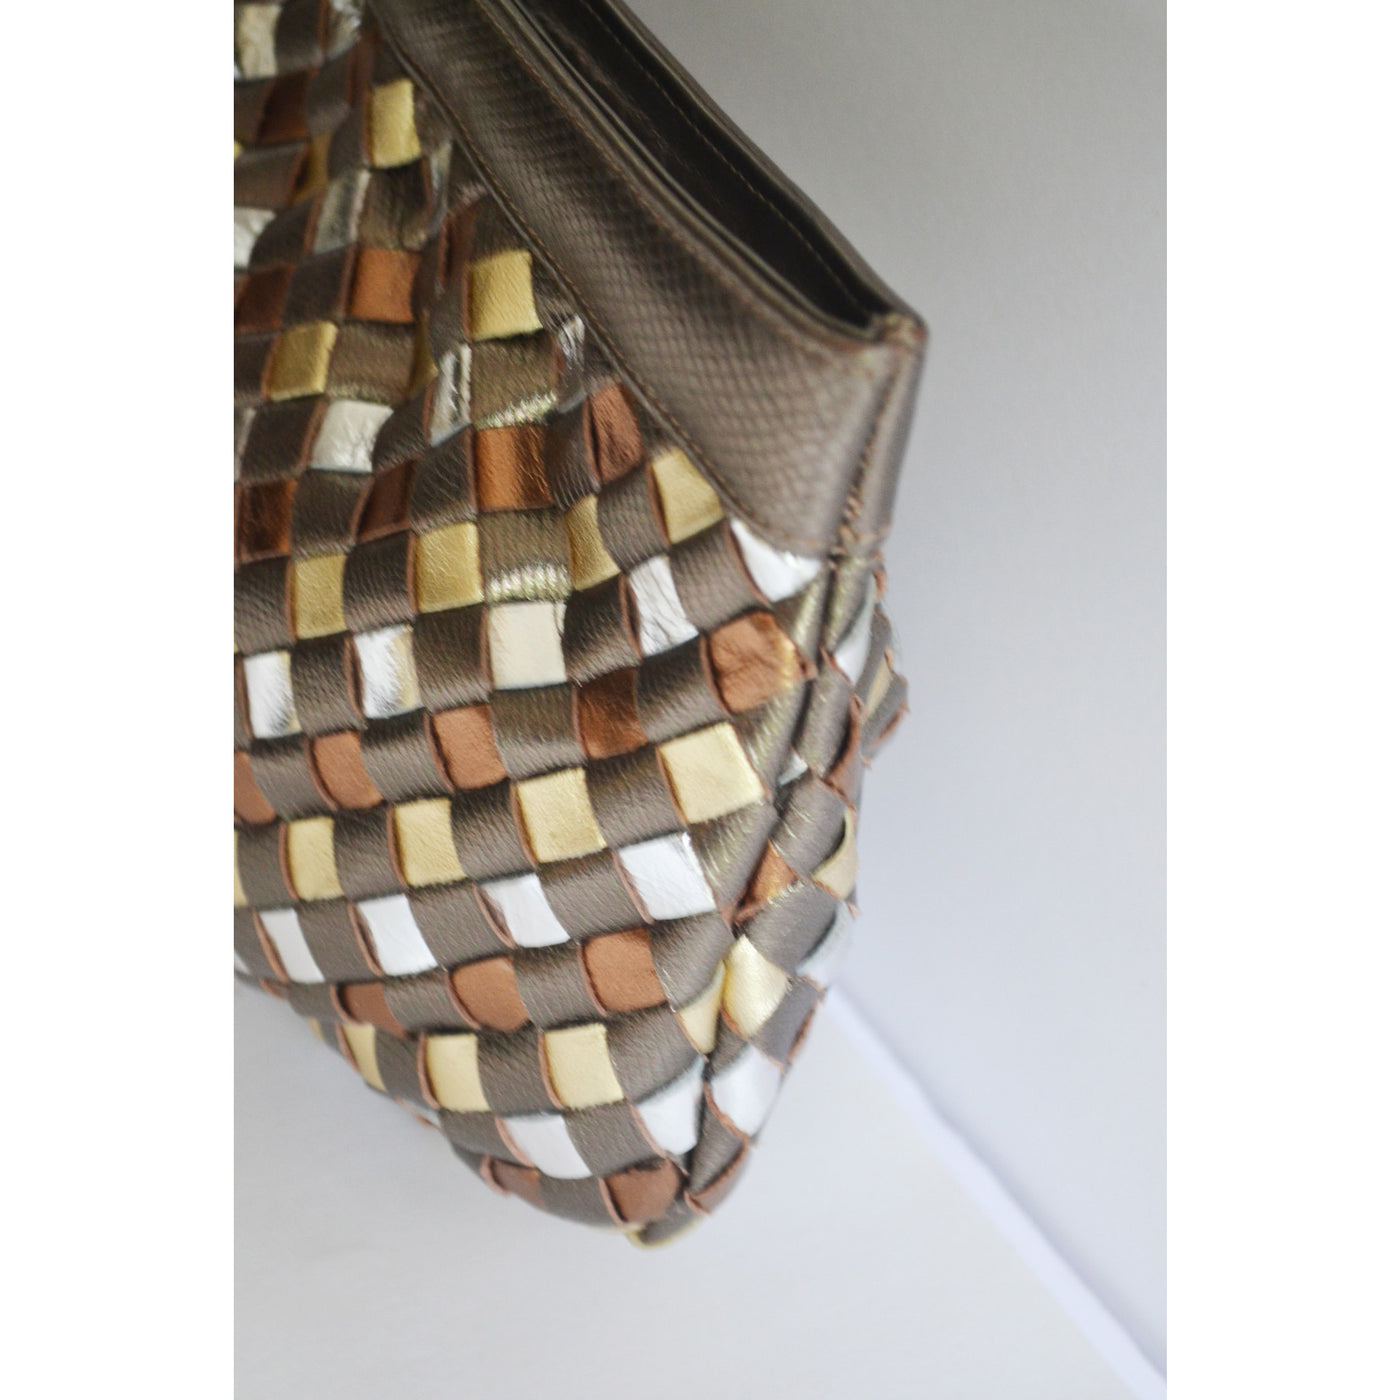 Vintage Metallic Woven Leather Clutch Purse By Sharif